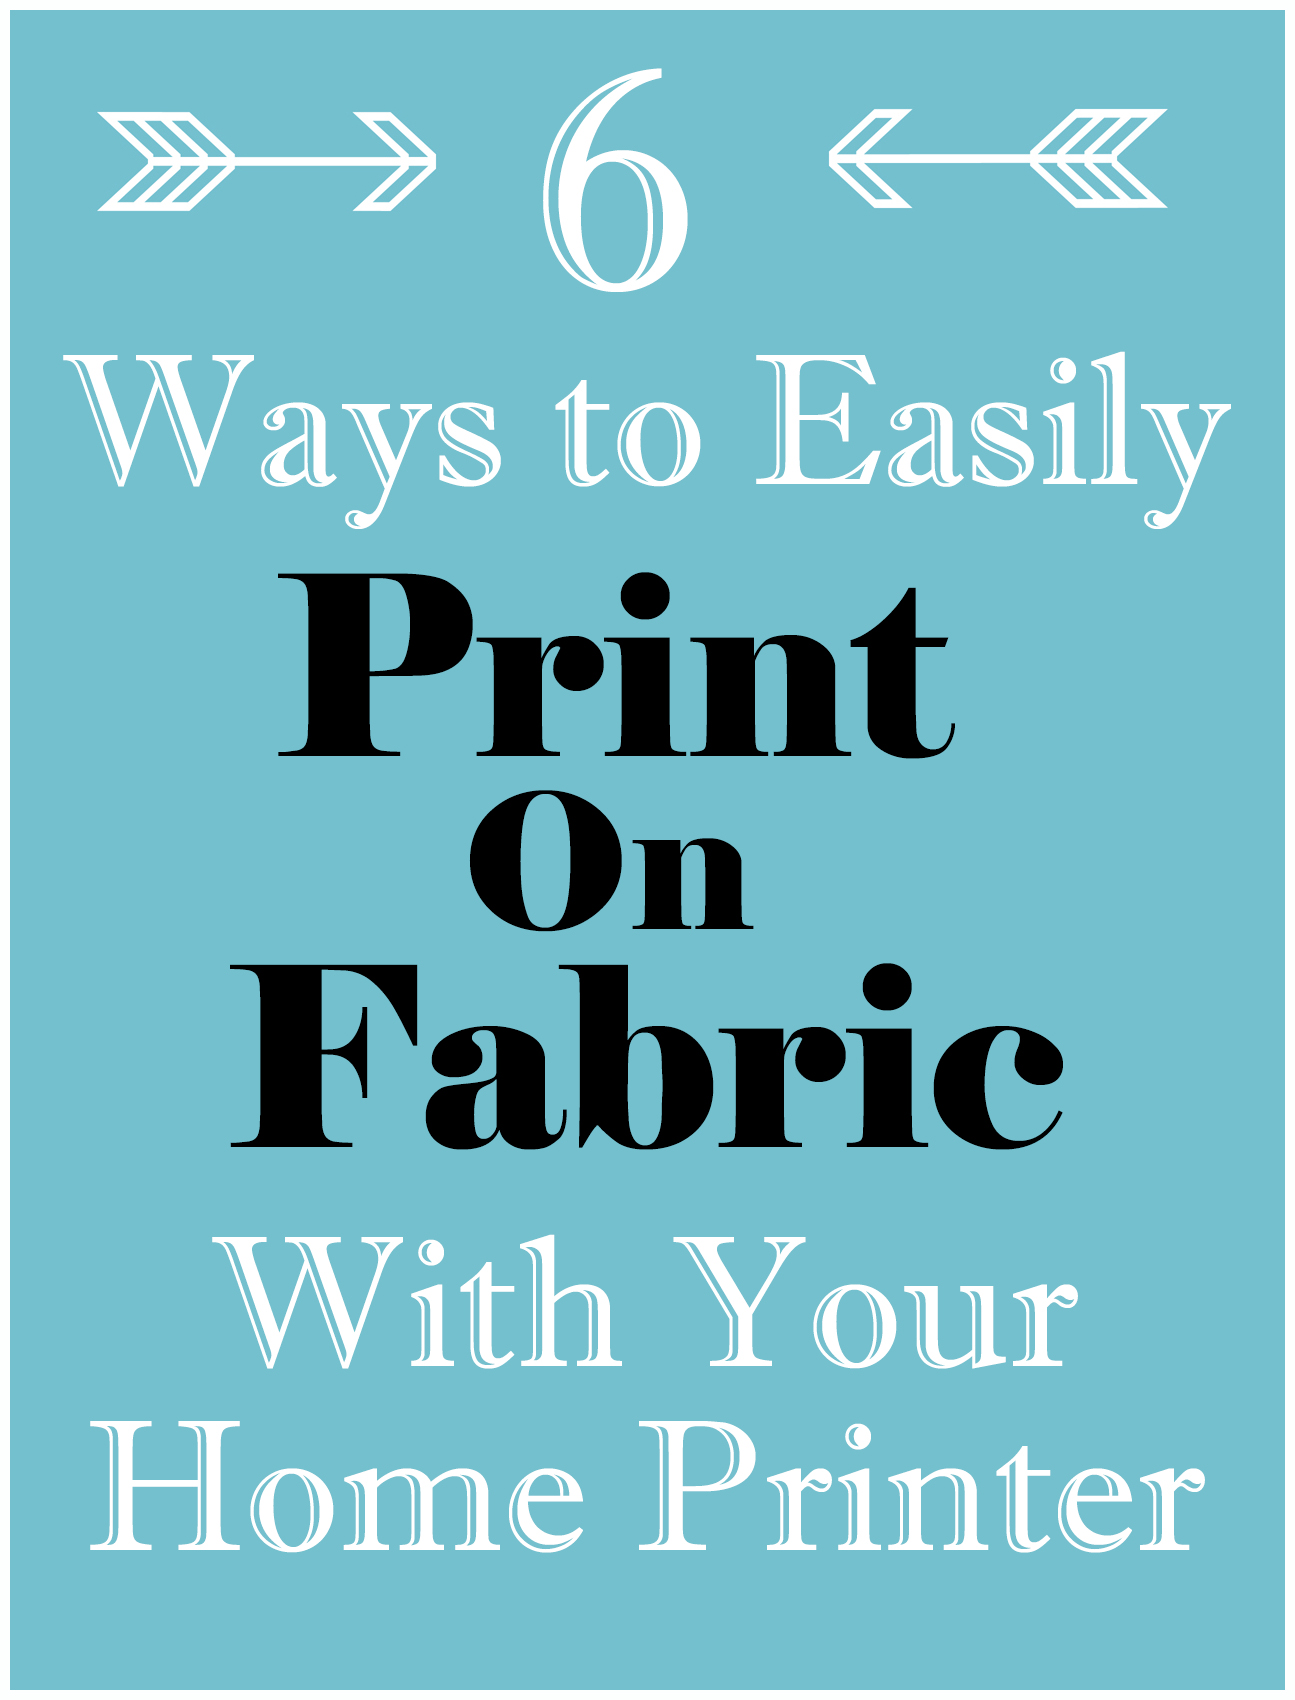 How to Print on Fabric